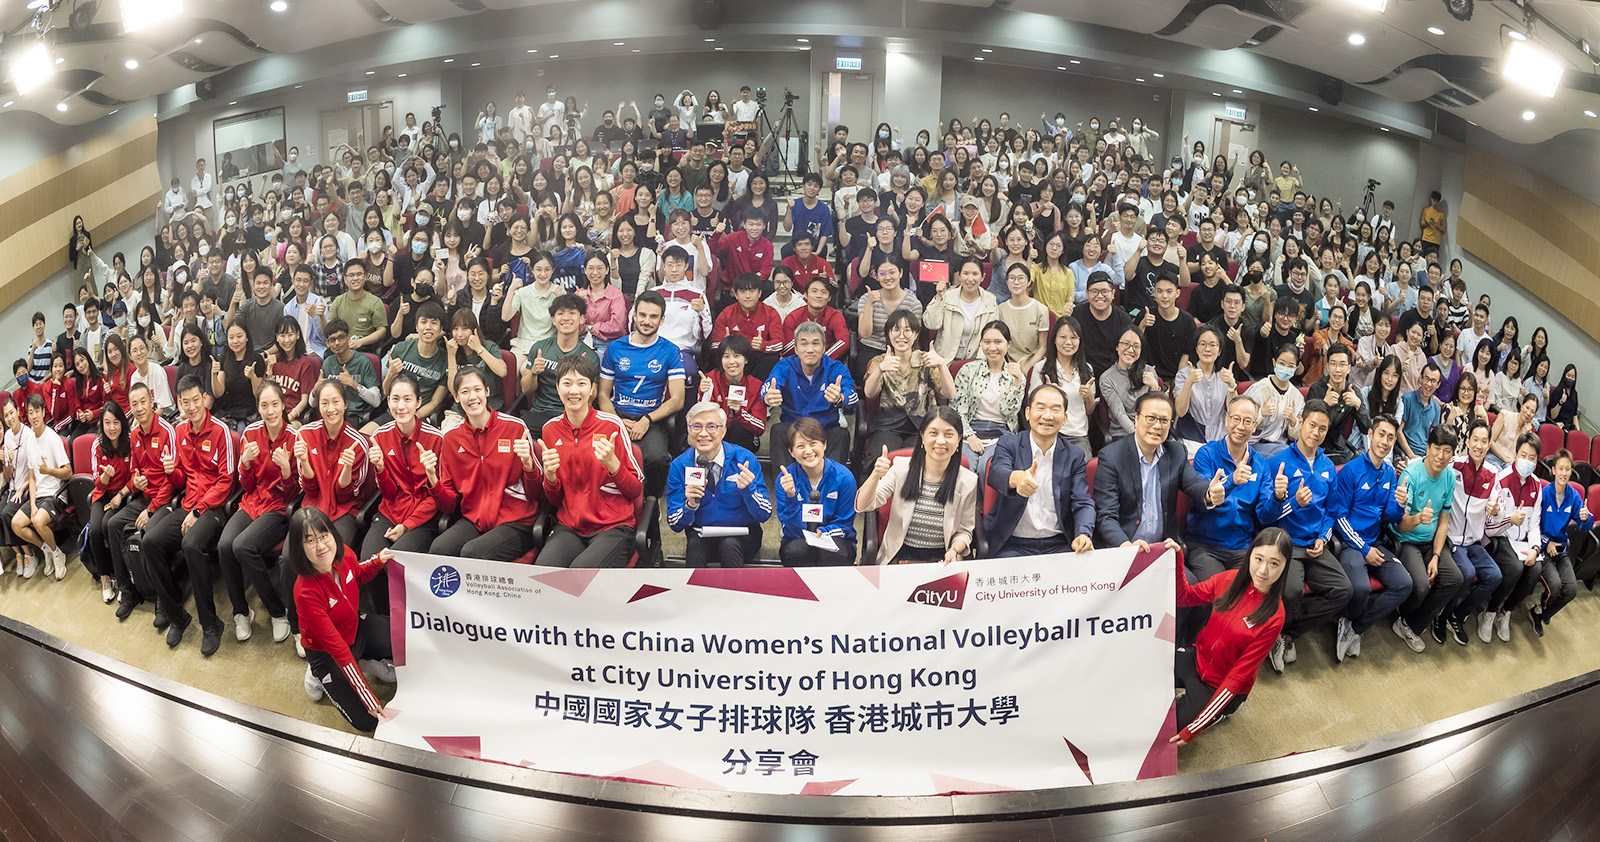 The China Women’s National Volleyball Team visited CityU to share their spirits with over 500 students, staff and alumni.